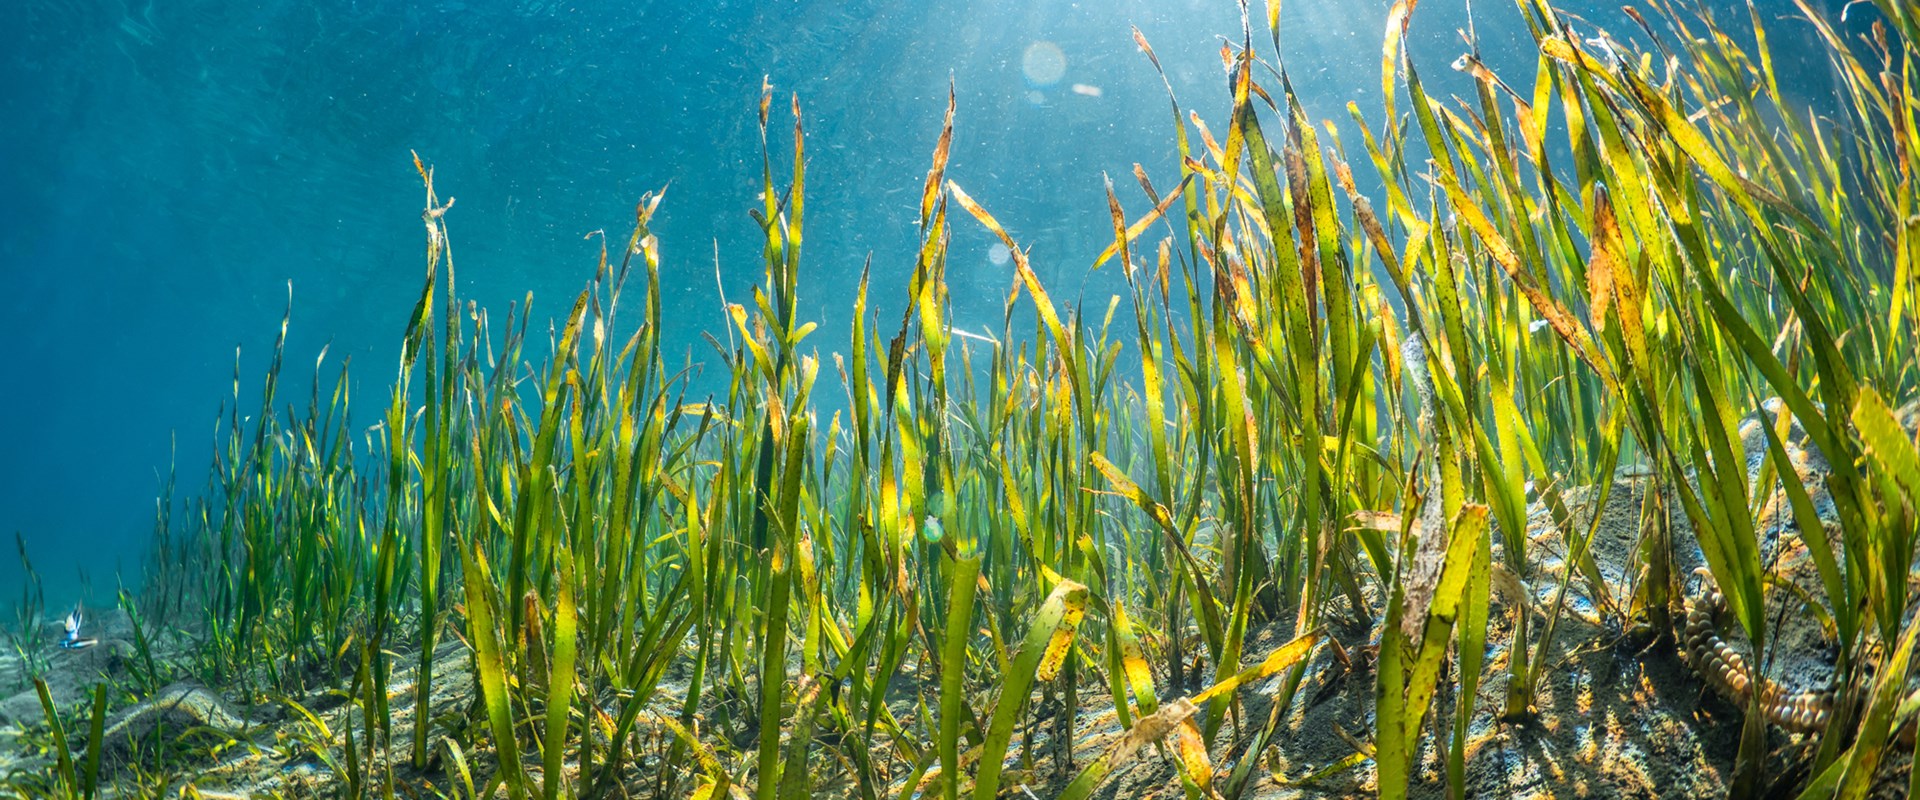 Seagrass growing in turquoise waters